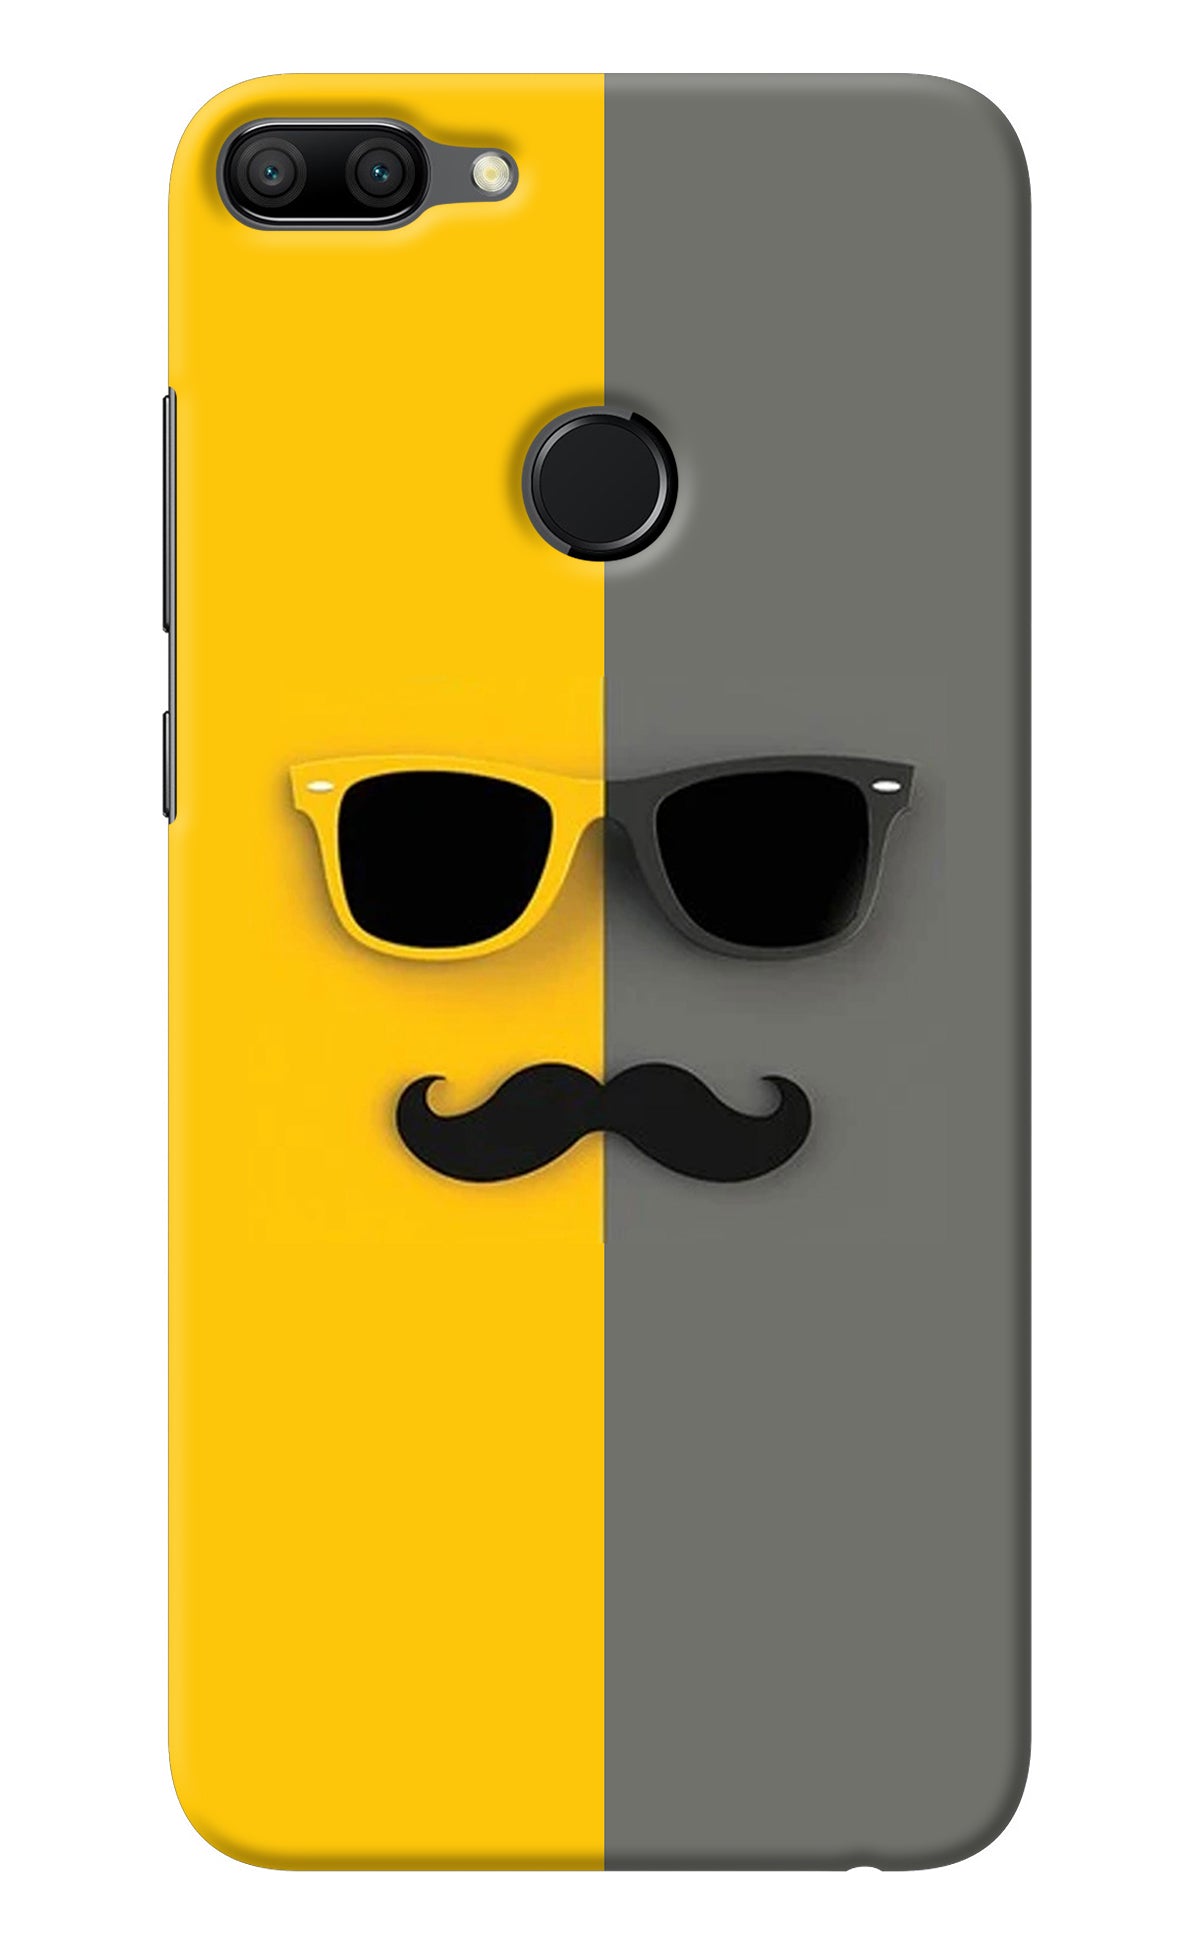 Sunglasses with Mustache Honor 9N Back Cover